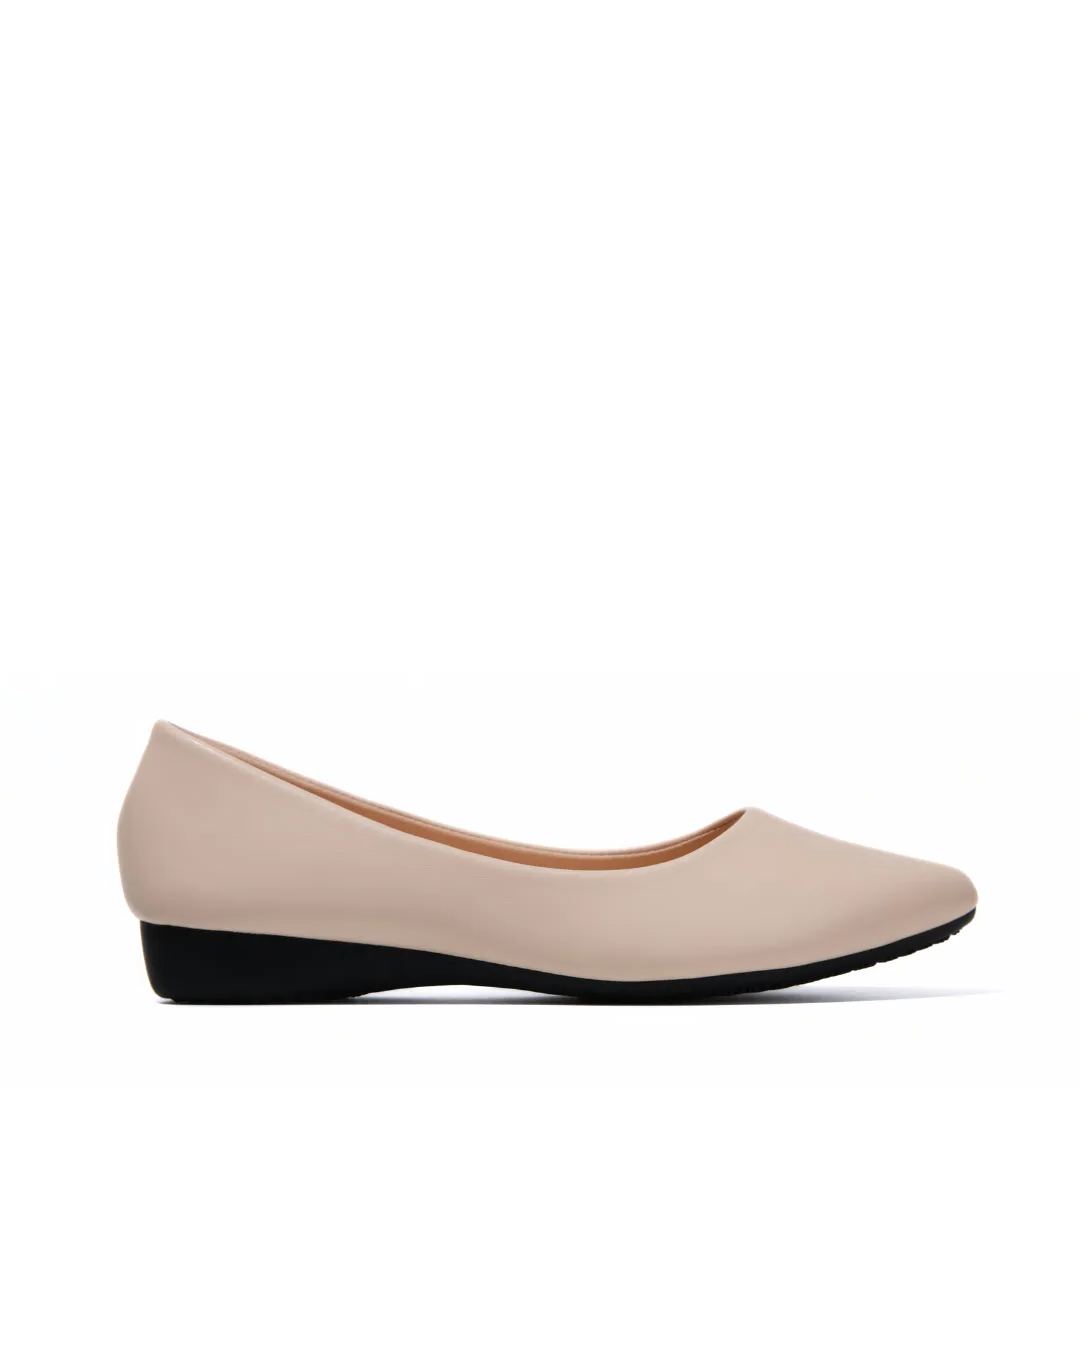 【NEW】Lyden Air-Cushioned Series 2cm Low Heels - Beige